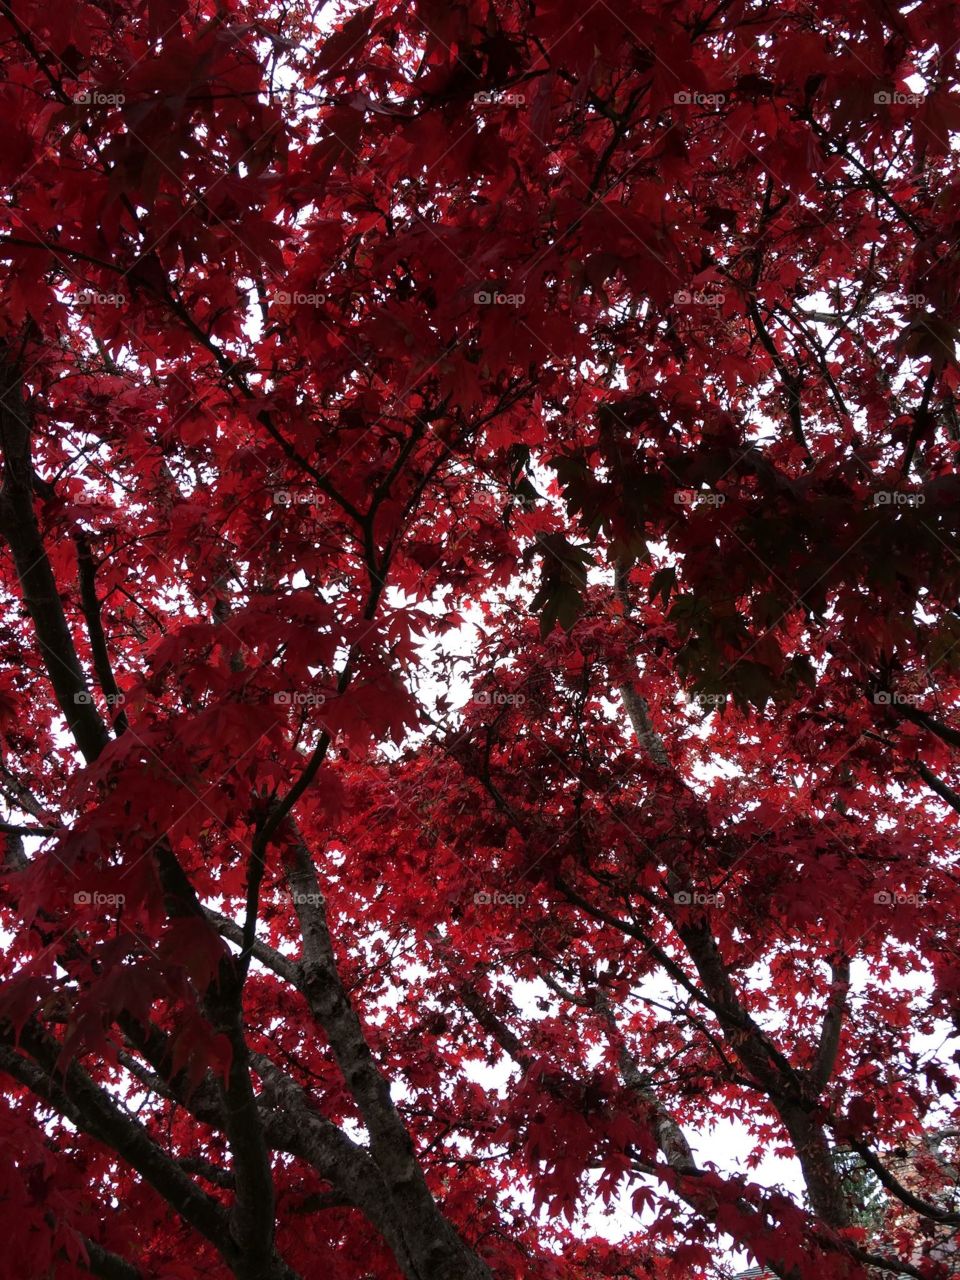 Shot from underneath spectacular bright red maple tree looking towards the beautiful sky